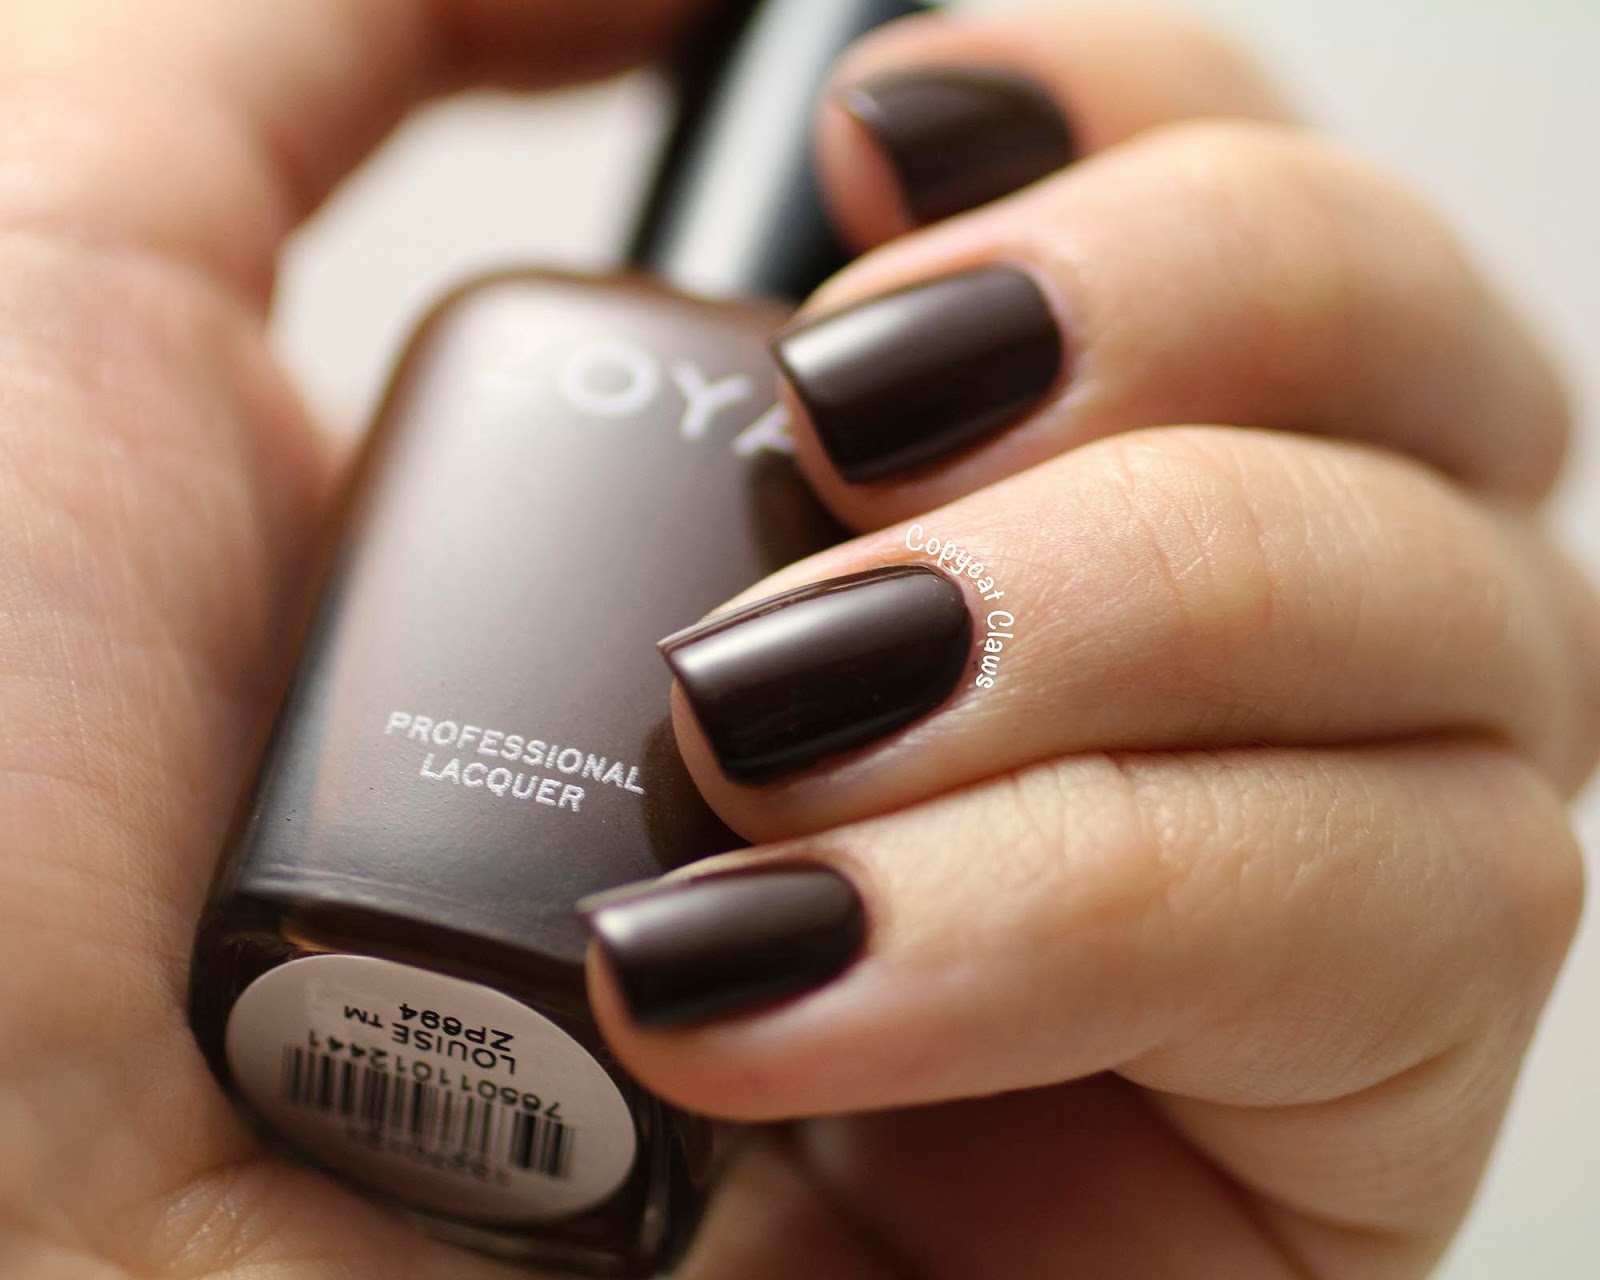 Get everything you need... - Zoya Nail Polish and Treatments | Facebook